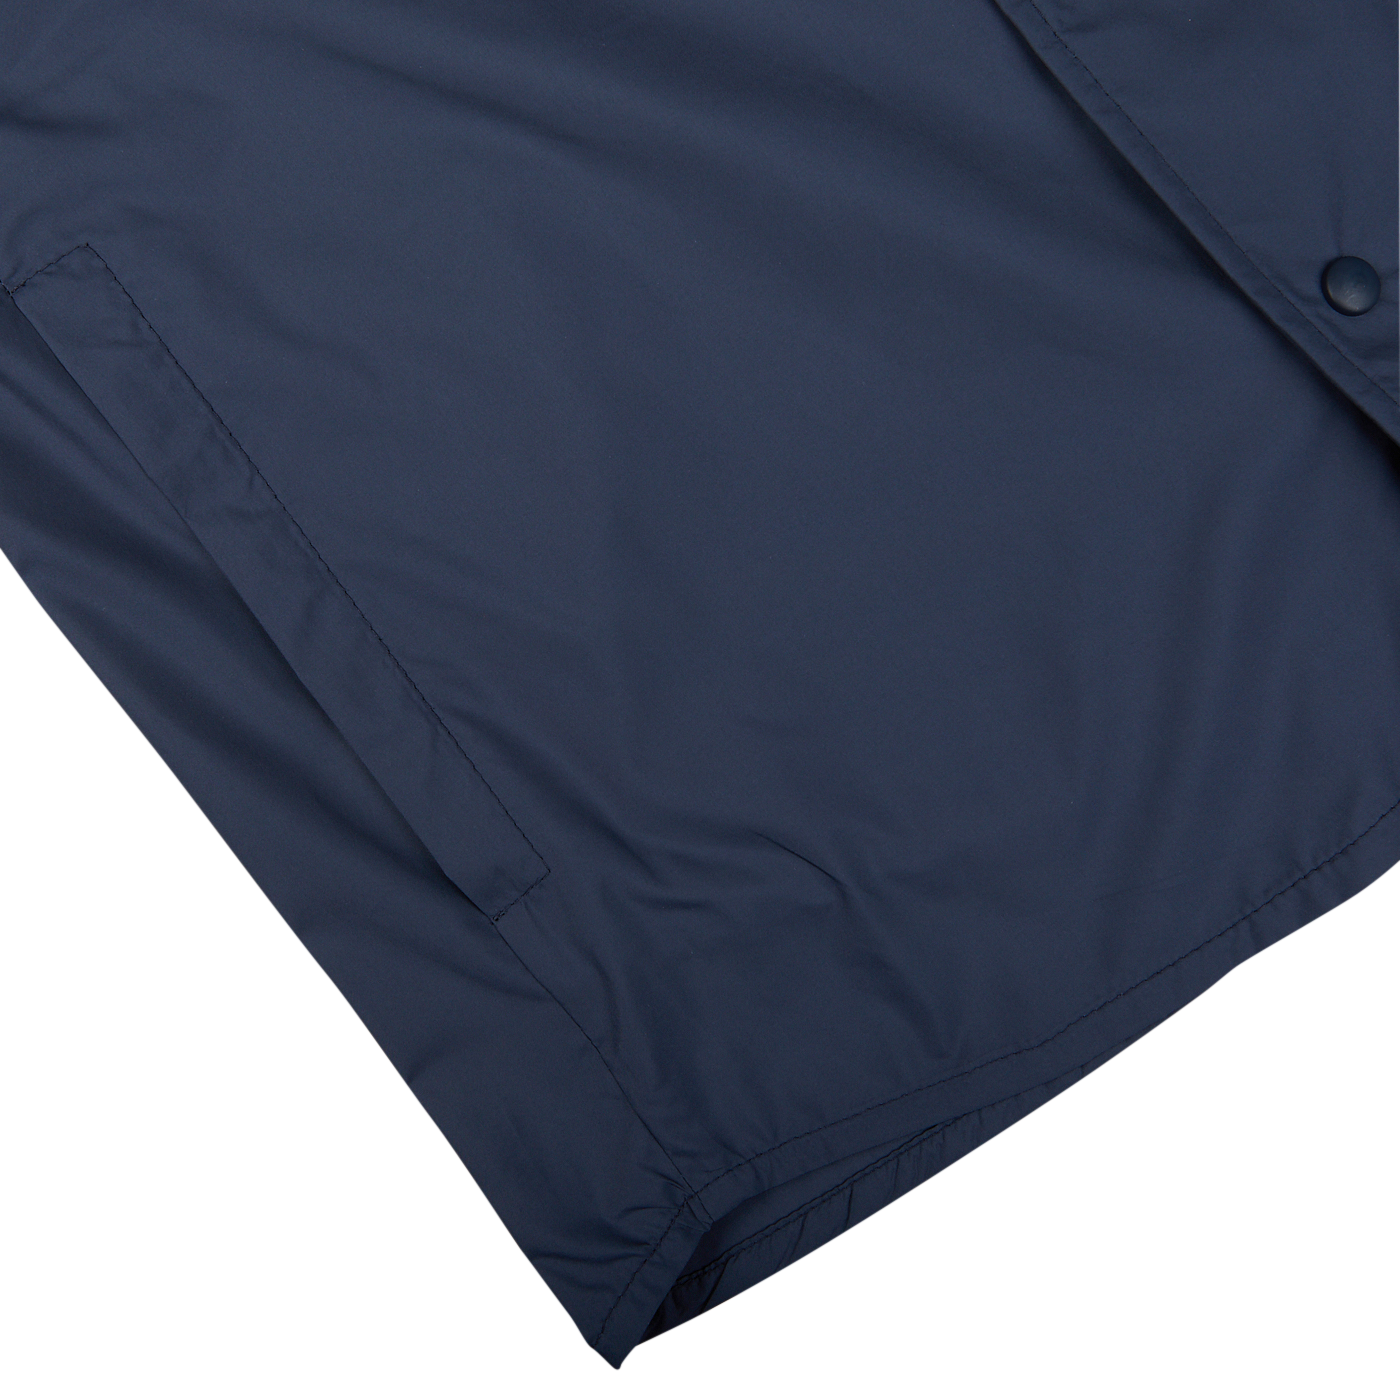 Close-up of a Mazzarelli navy blue nylon water resistant overshirt with a button and reinforced stitching on white background.